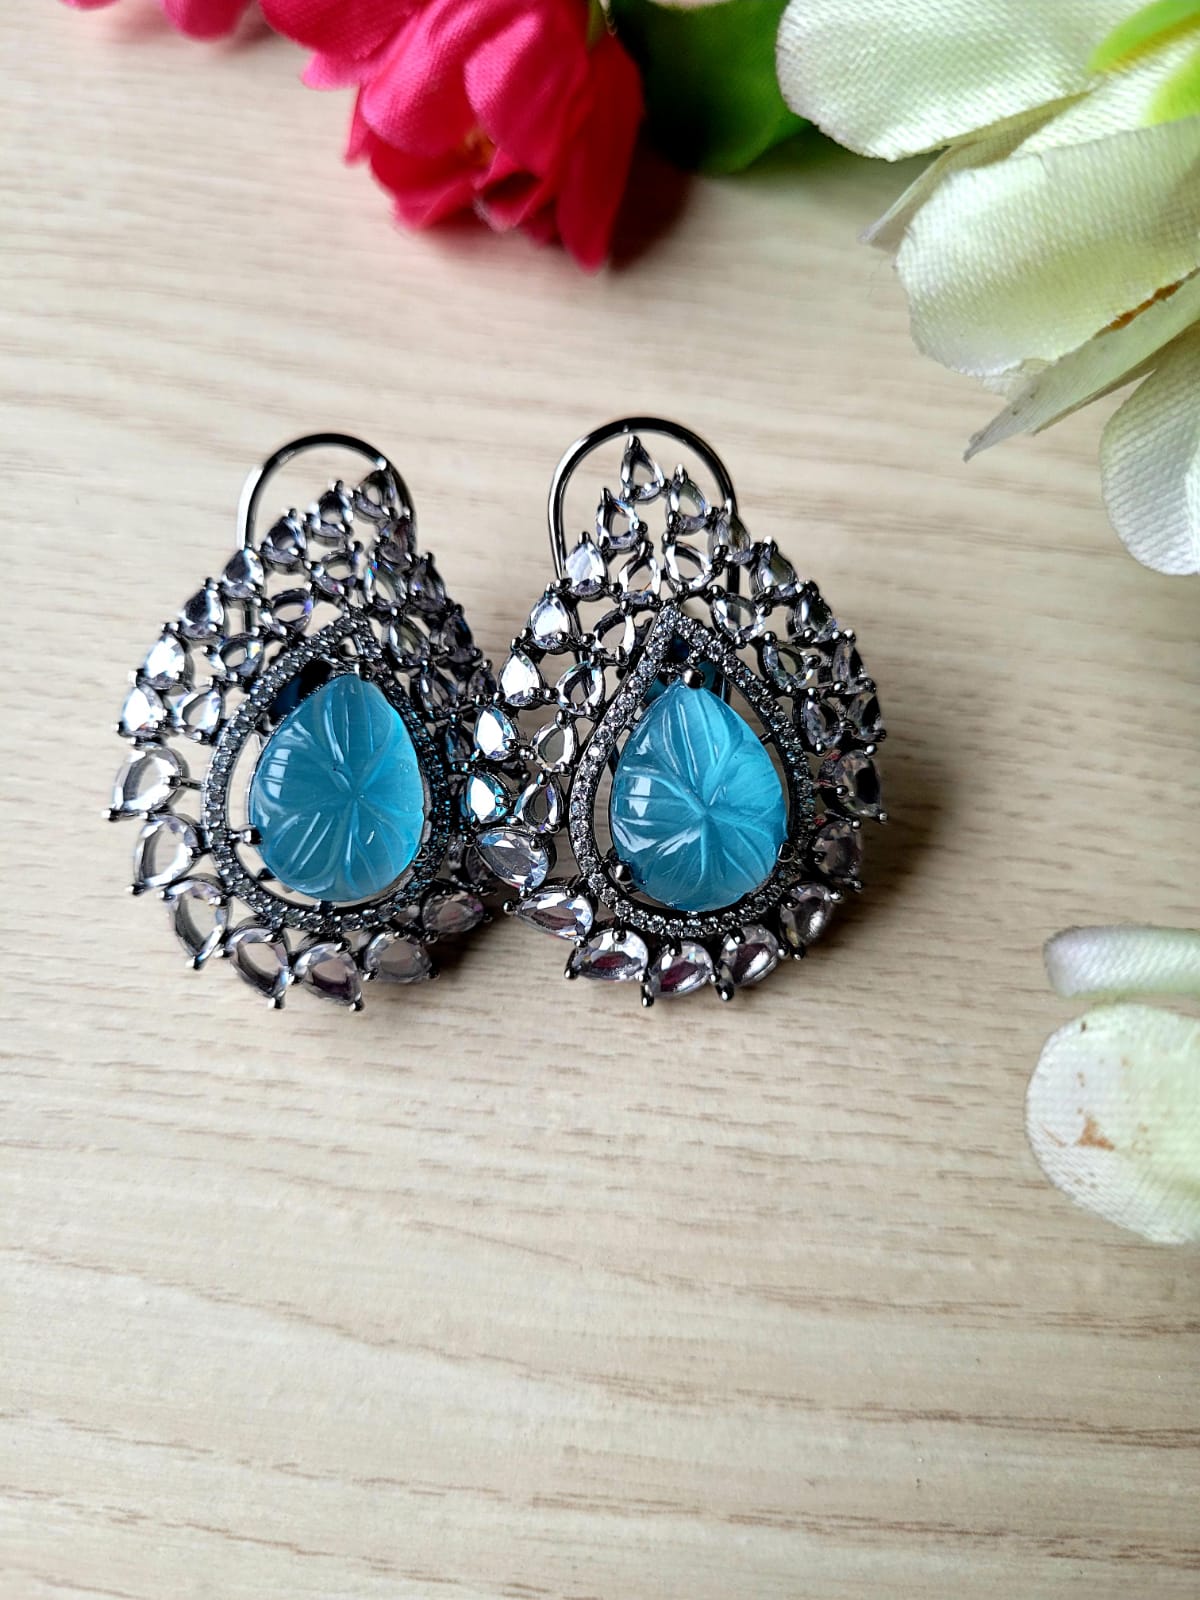 Best silver statement earrings pendant with light blue stone